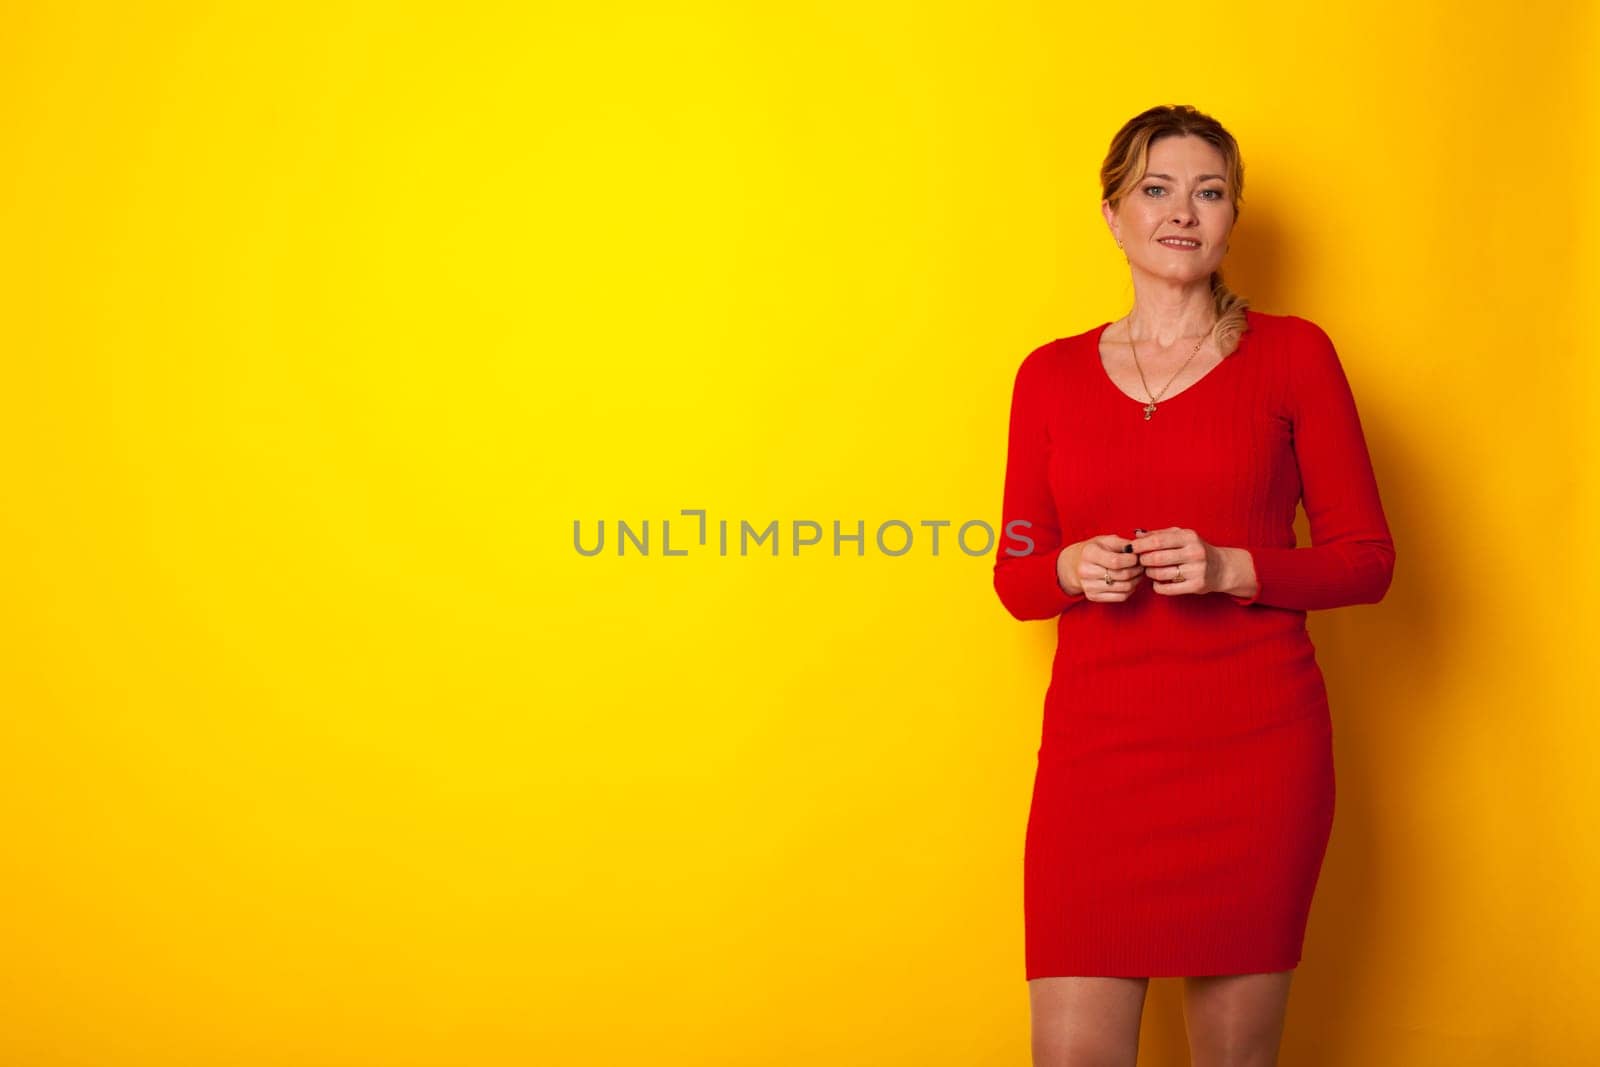 a woman in a red dress on a yellow background by Simakov